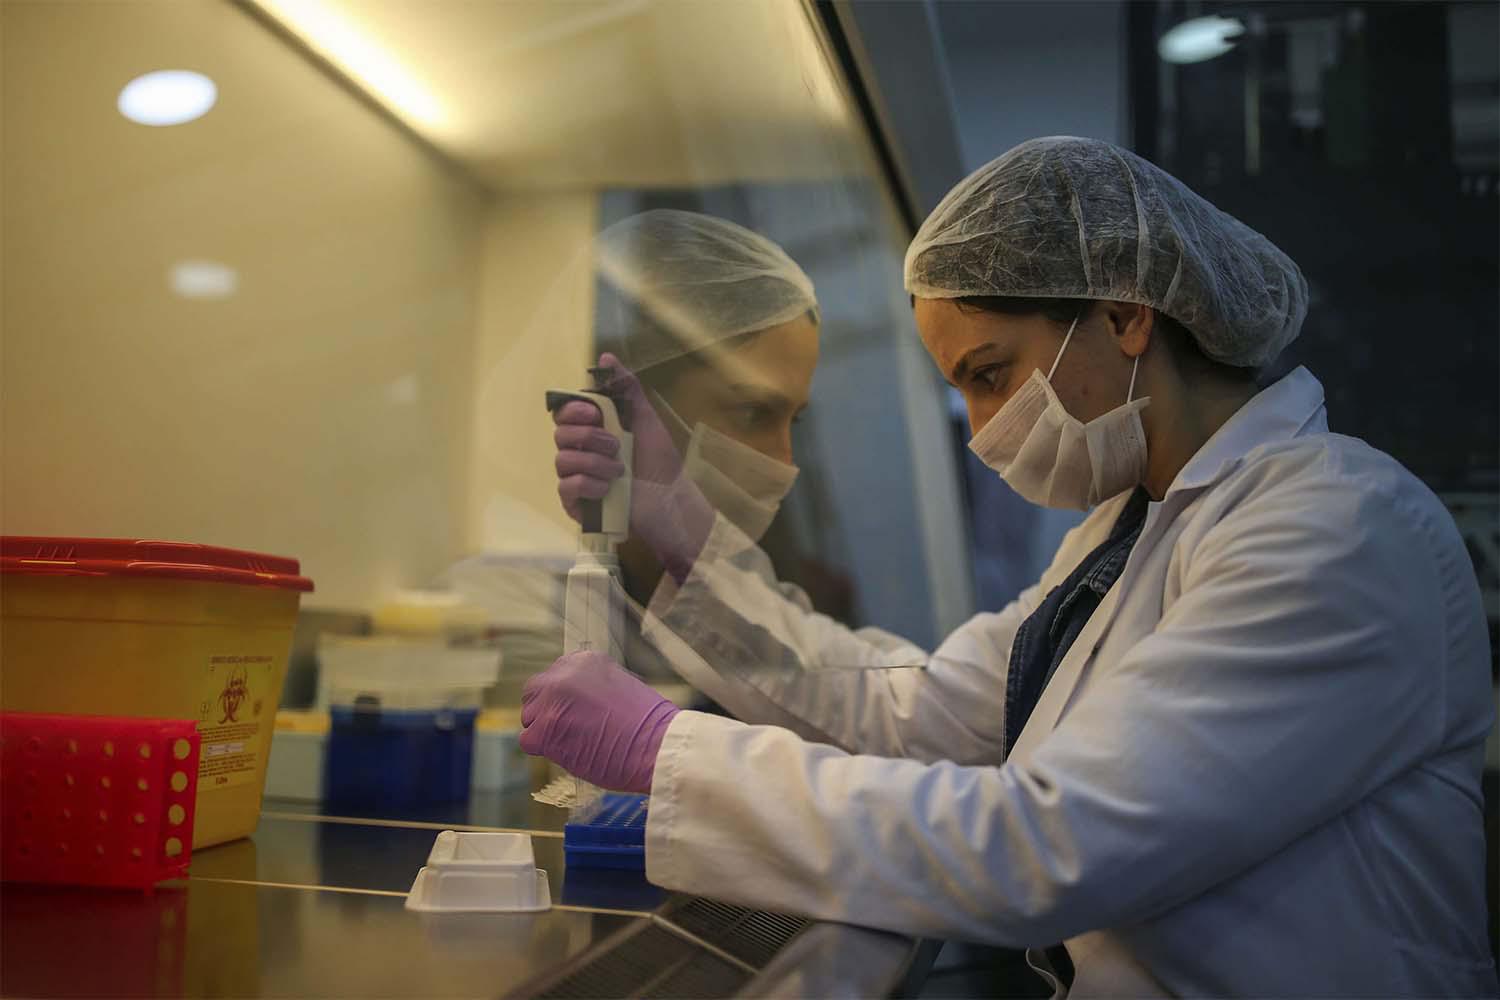 Research and development company employee works on the production of coronavirus testing kits in Gebze